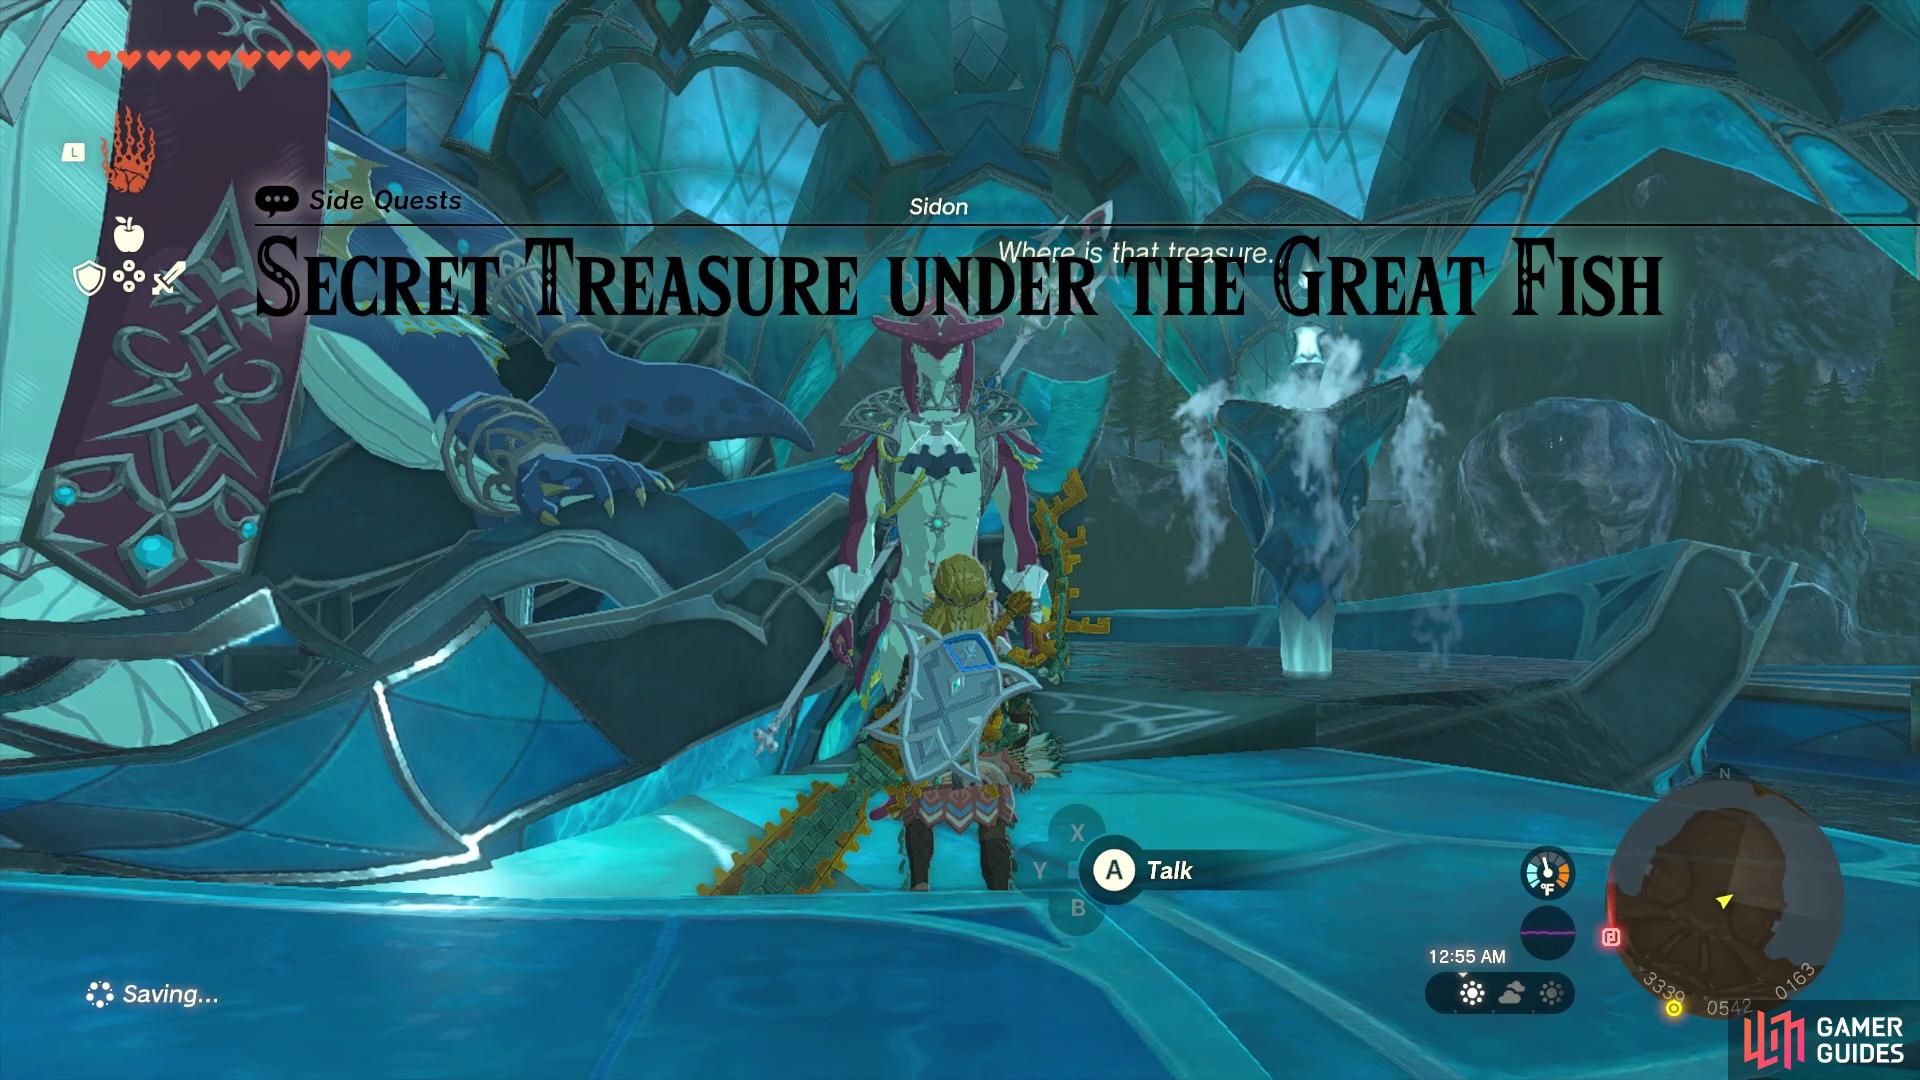 Sidon will give you a side quest to hunt down some treasure.